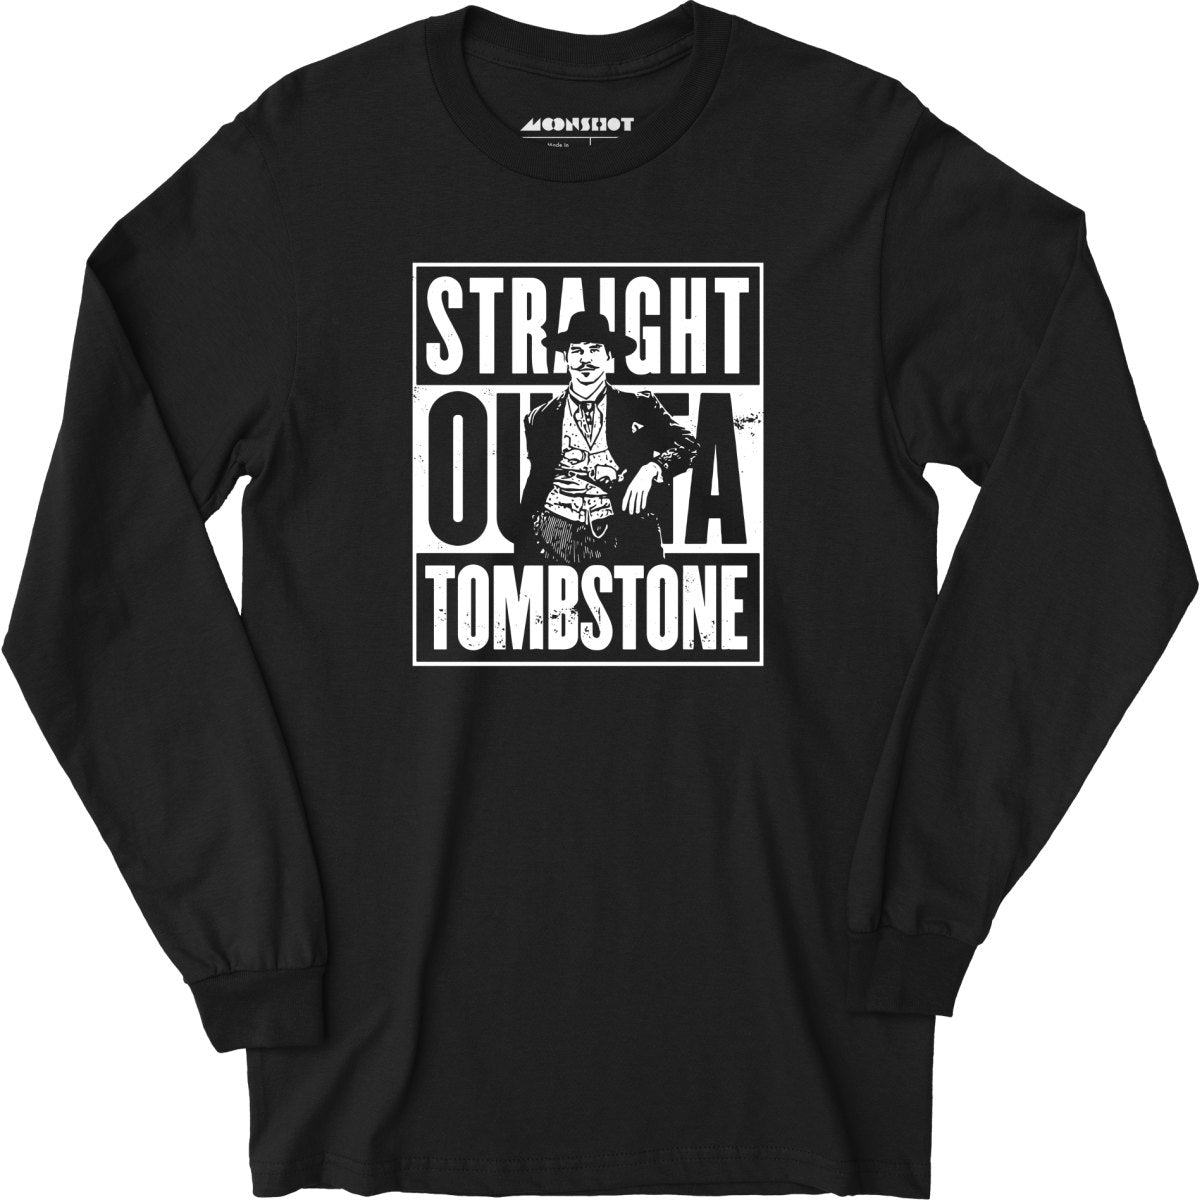 Straight Outta Tombstone - Long Sleeve T-Shirt